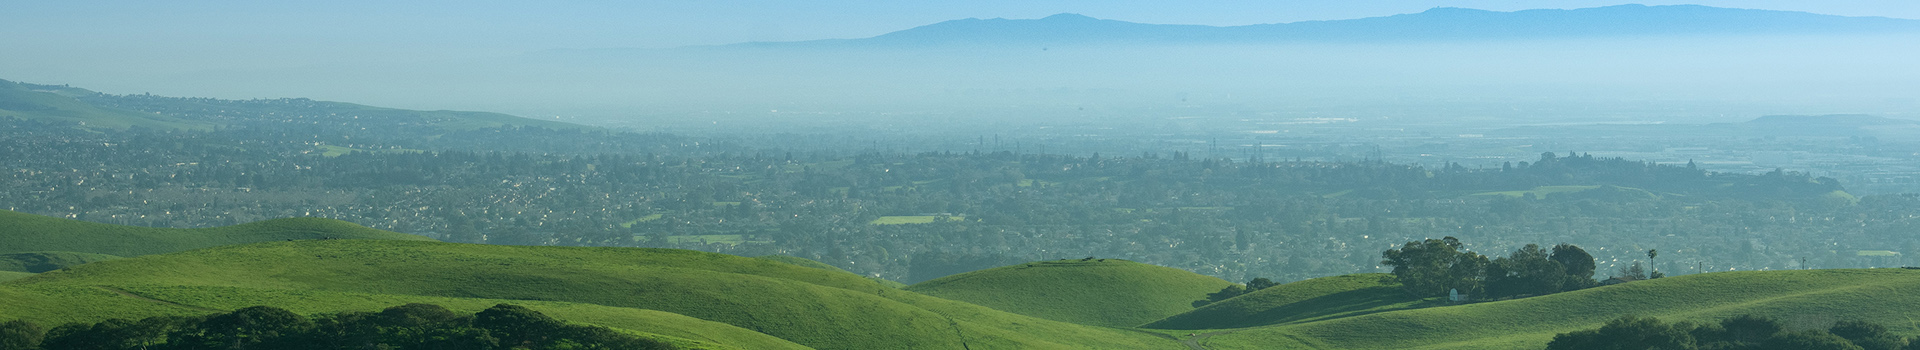 Landscape view of Fremont and the San Francisco Bay from the hills